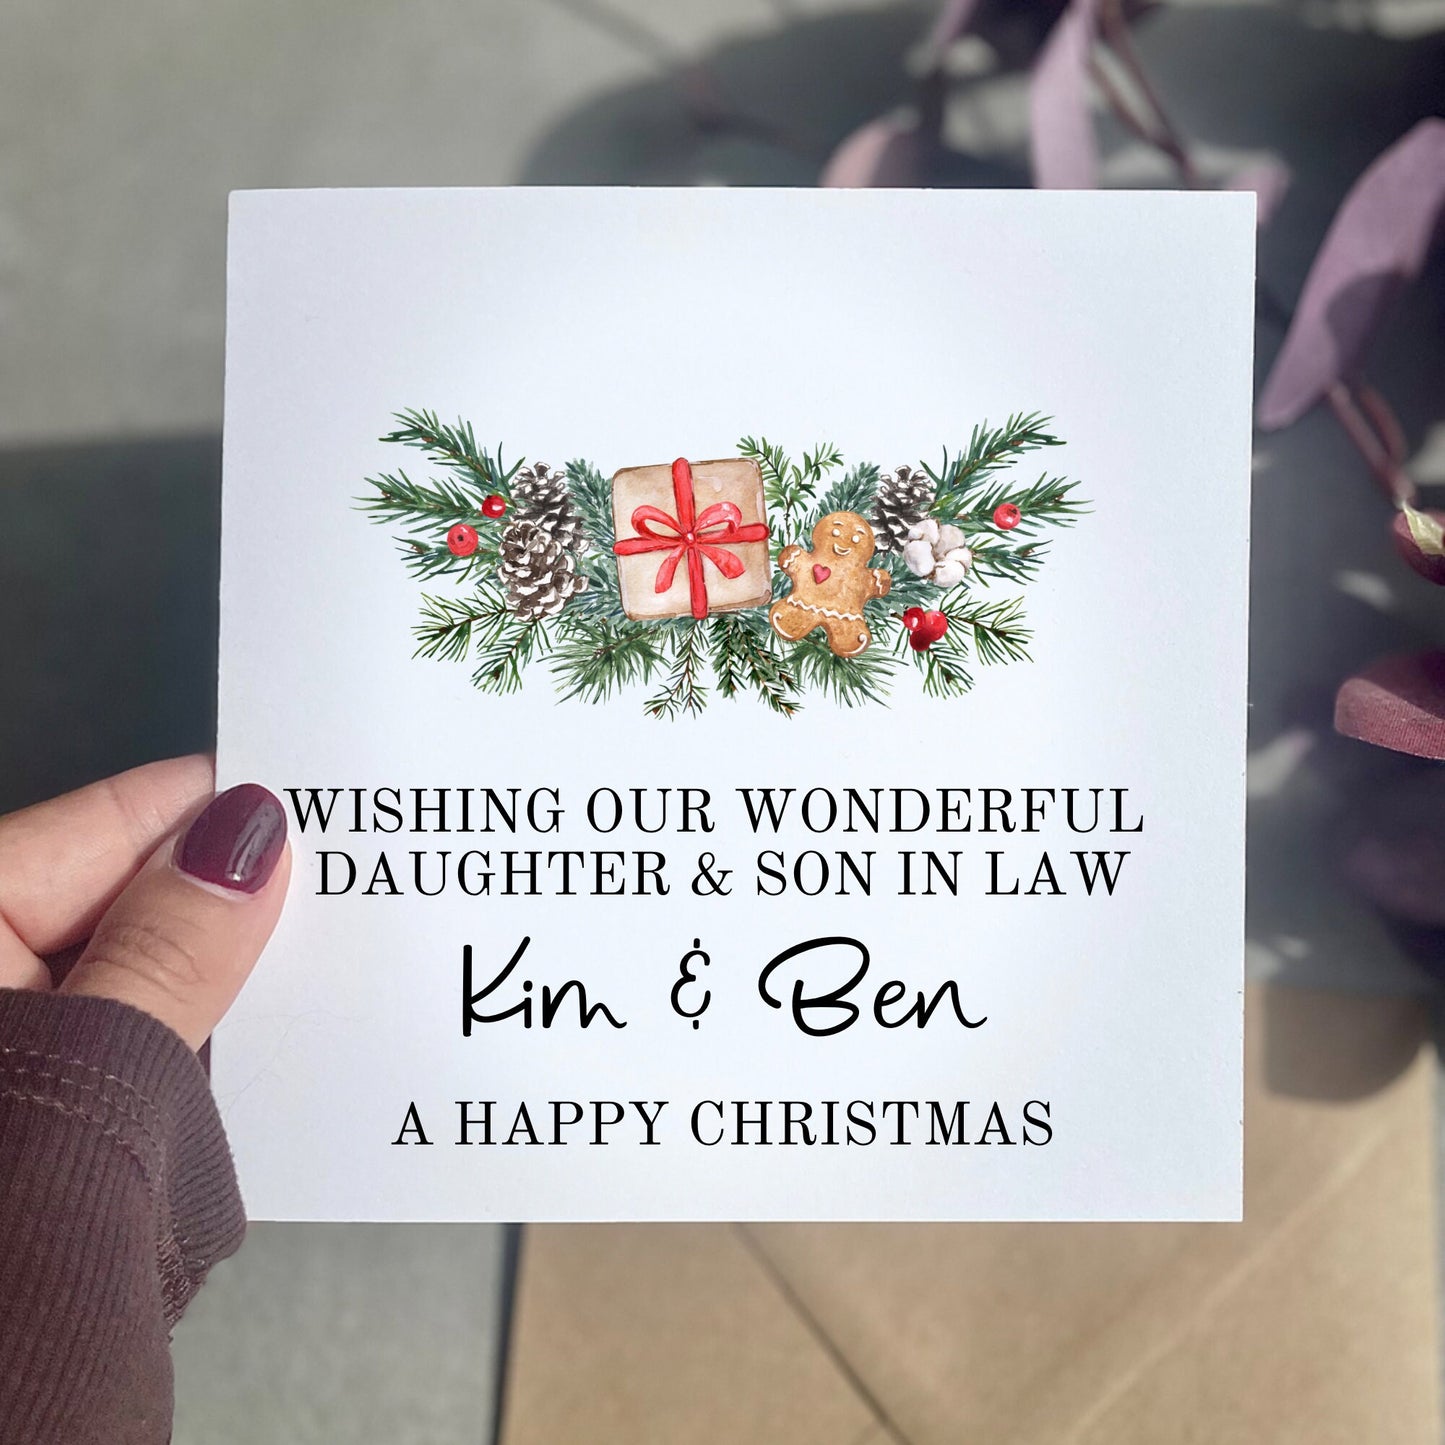 Wishing wonderful Daughter & son in law a happy Christmas card, personalised Christmas card for daughter and her husband